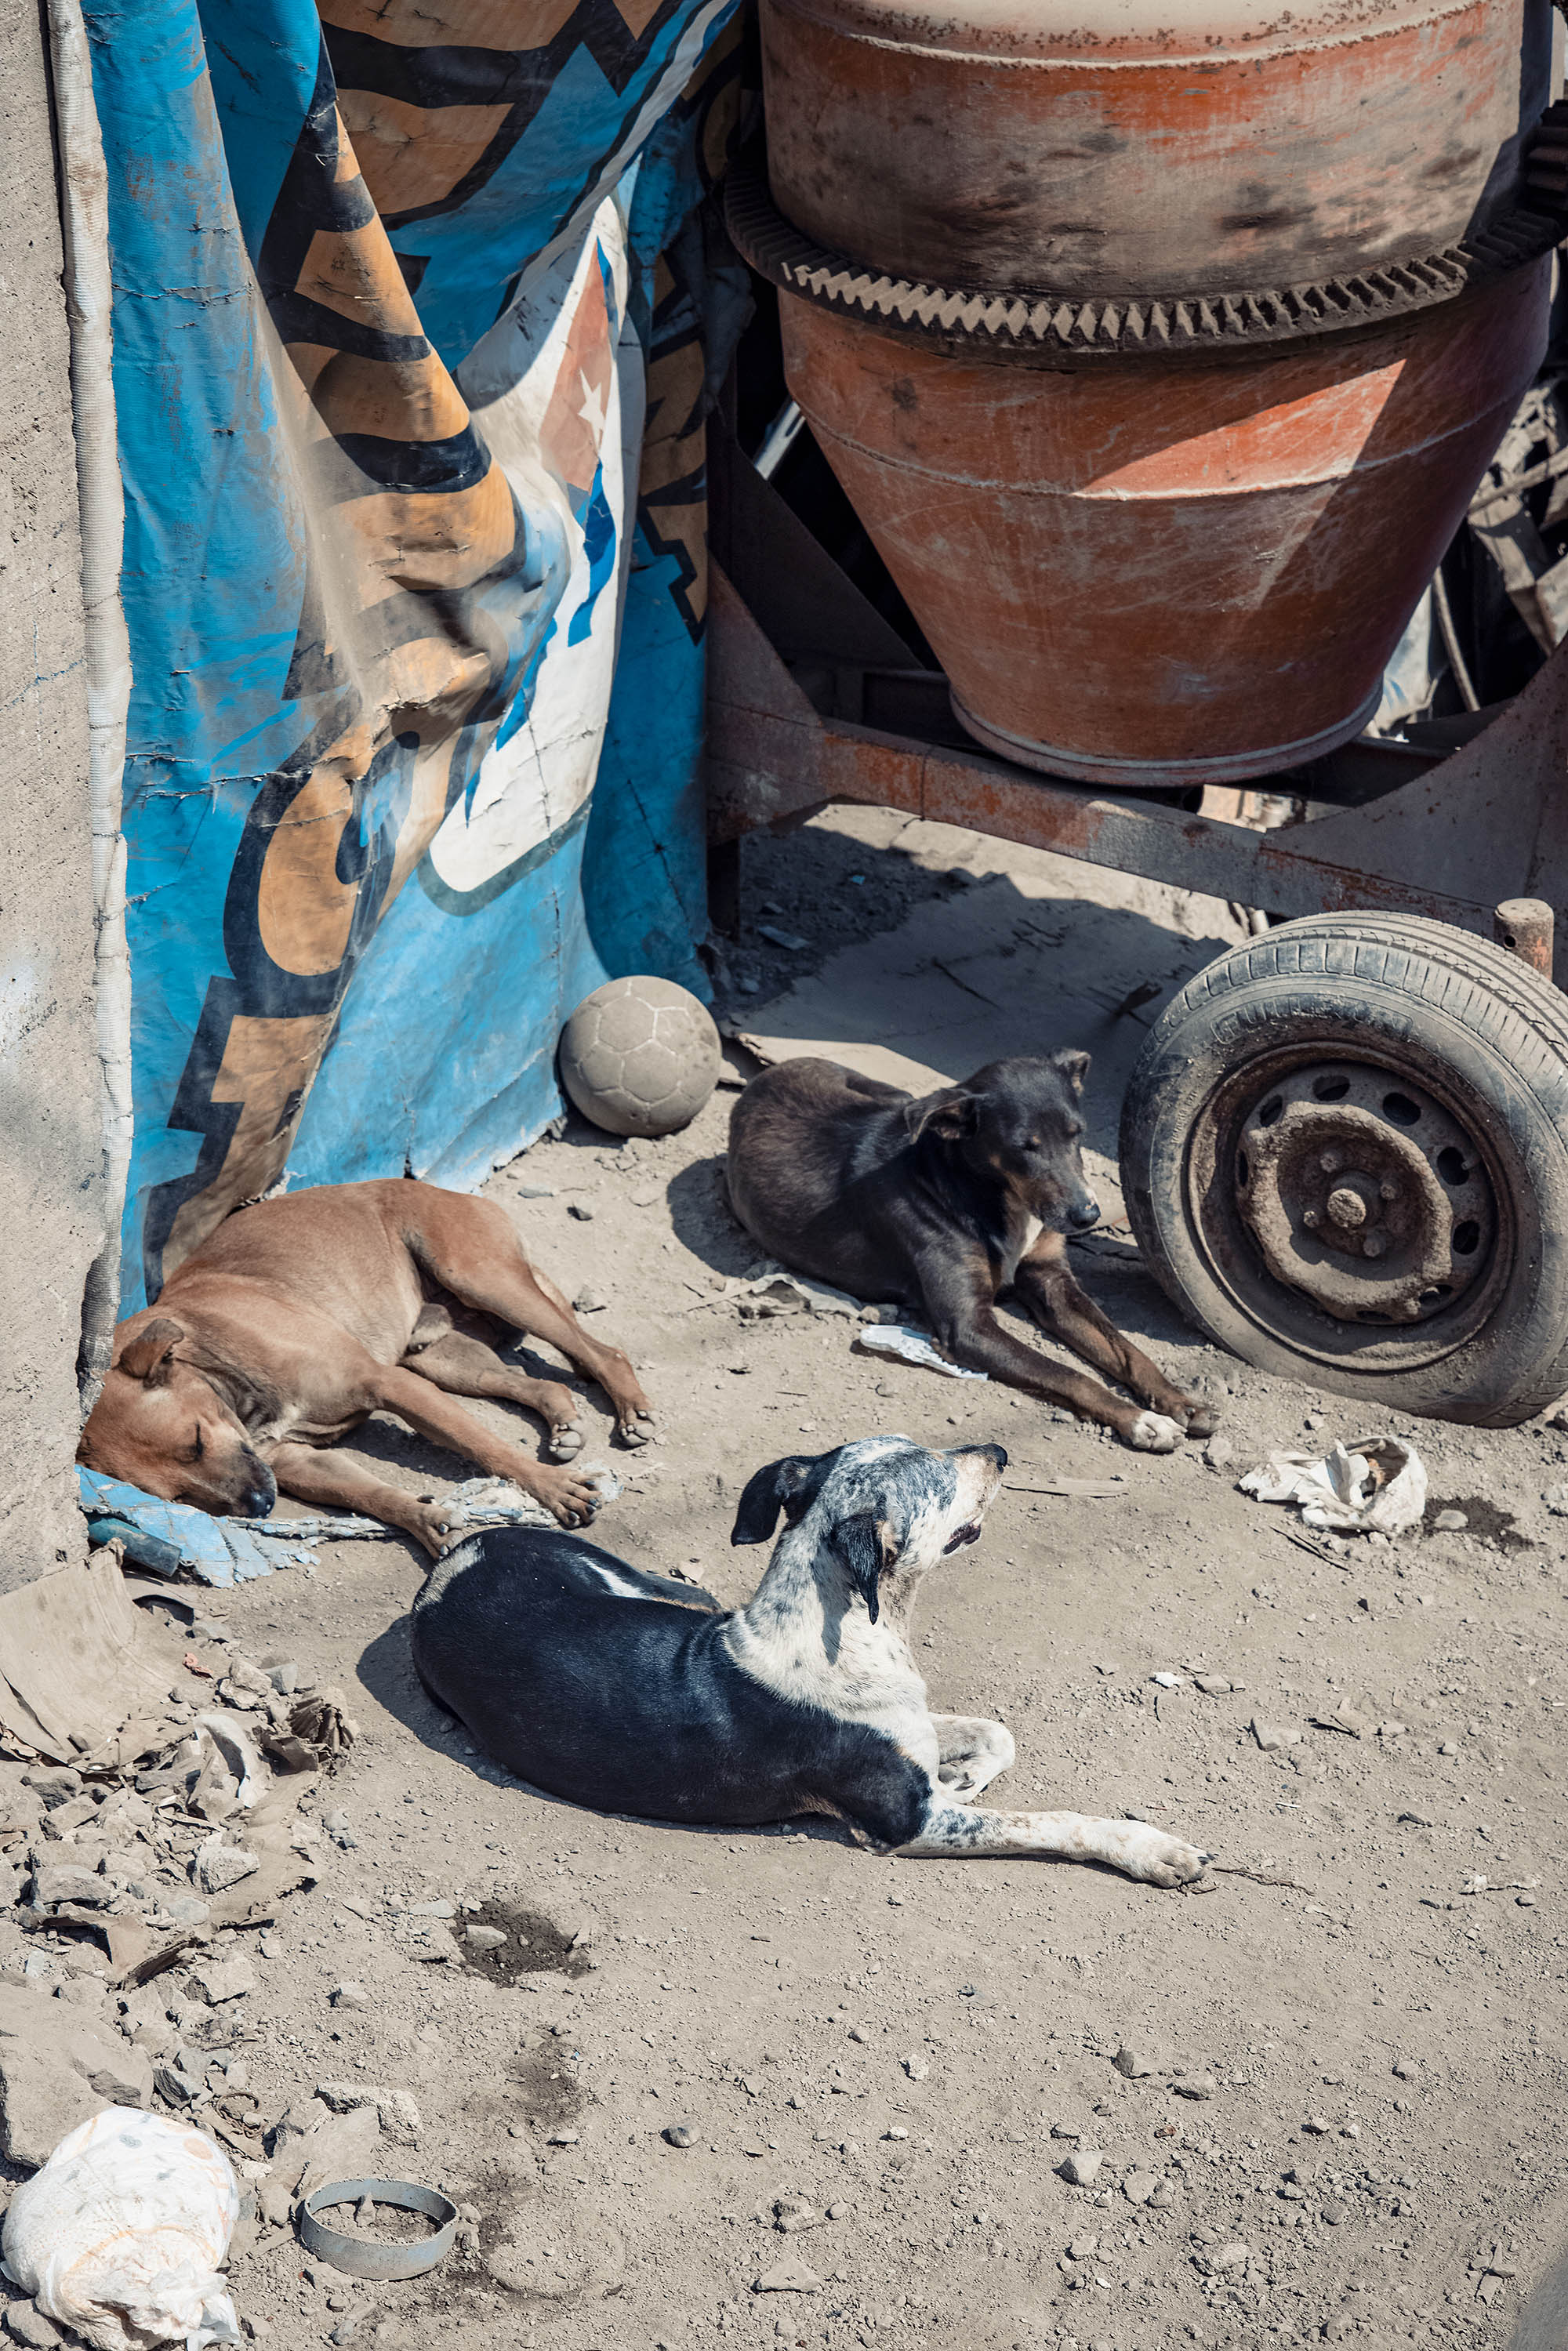 photograph of three dogs lying on the ground under the sun, one of which is asleep